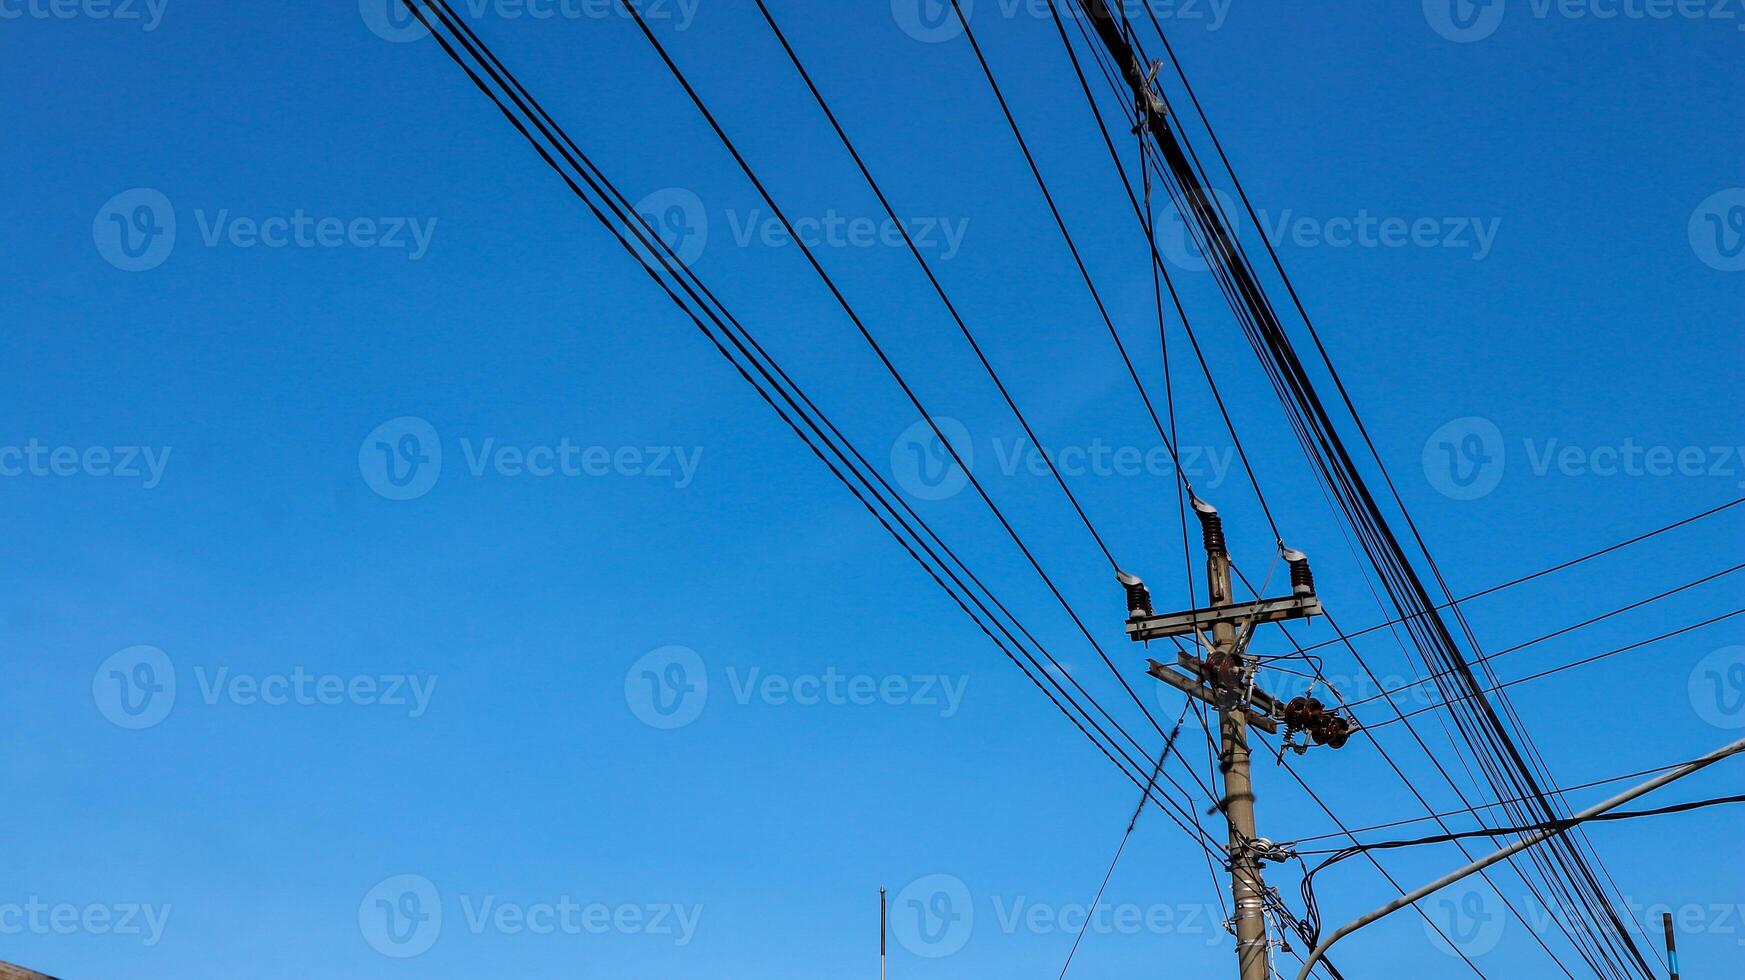 Electric wires and electric poles crossing the high voltage pole tower against the blue sky background. photo